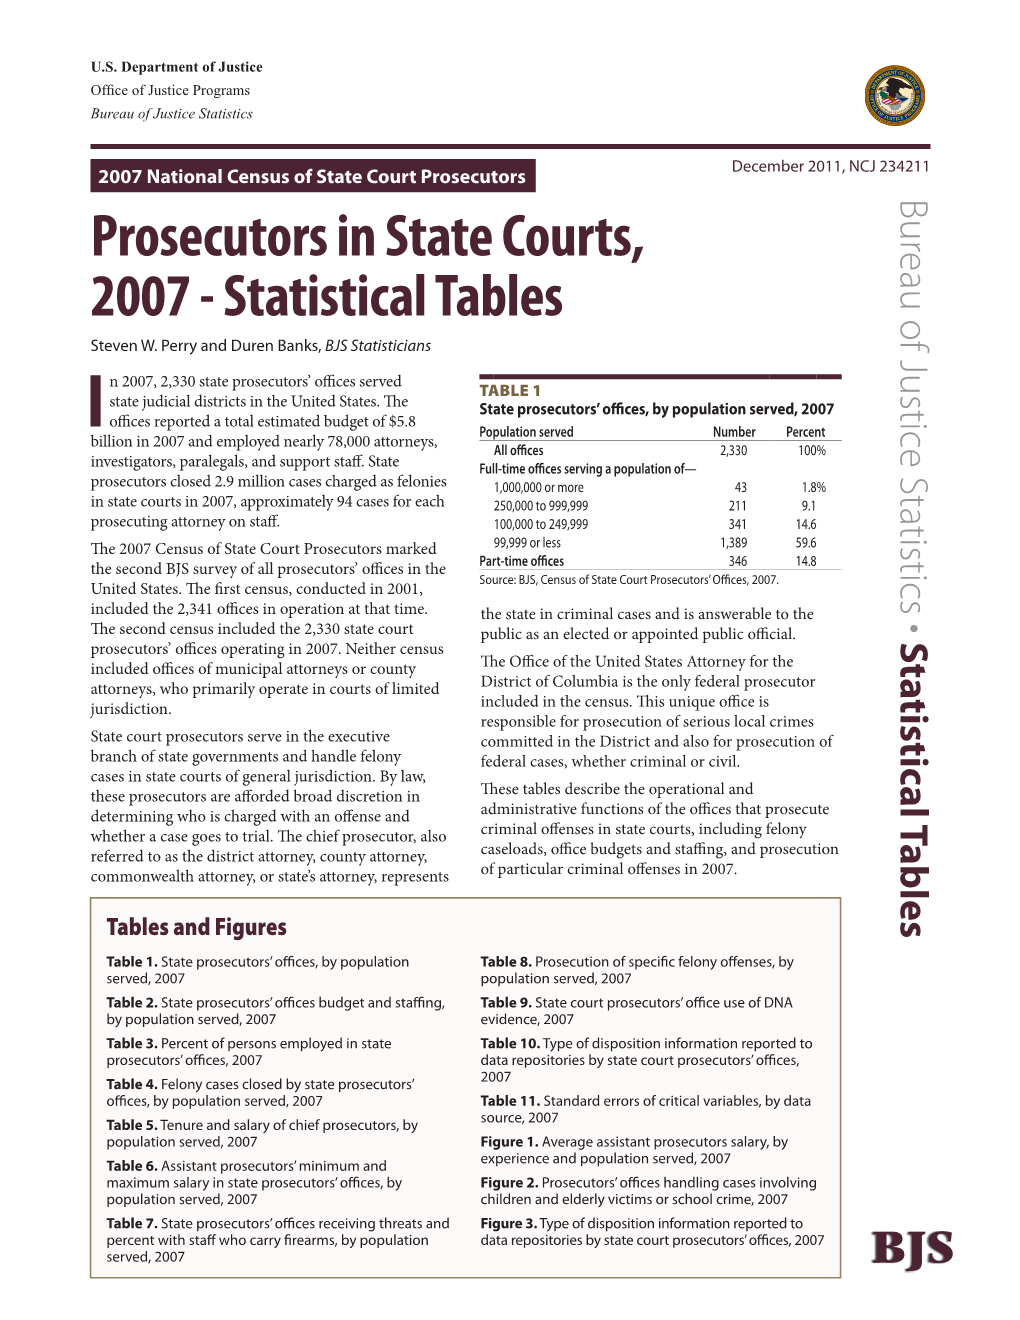 Prosecutors in State Courts, 2007 - Statistical Tables Steven W